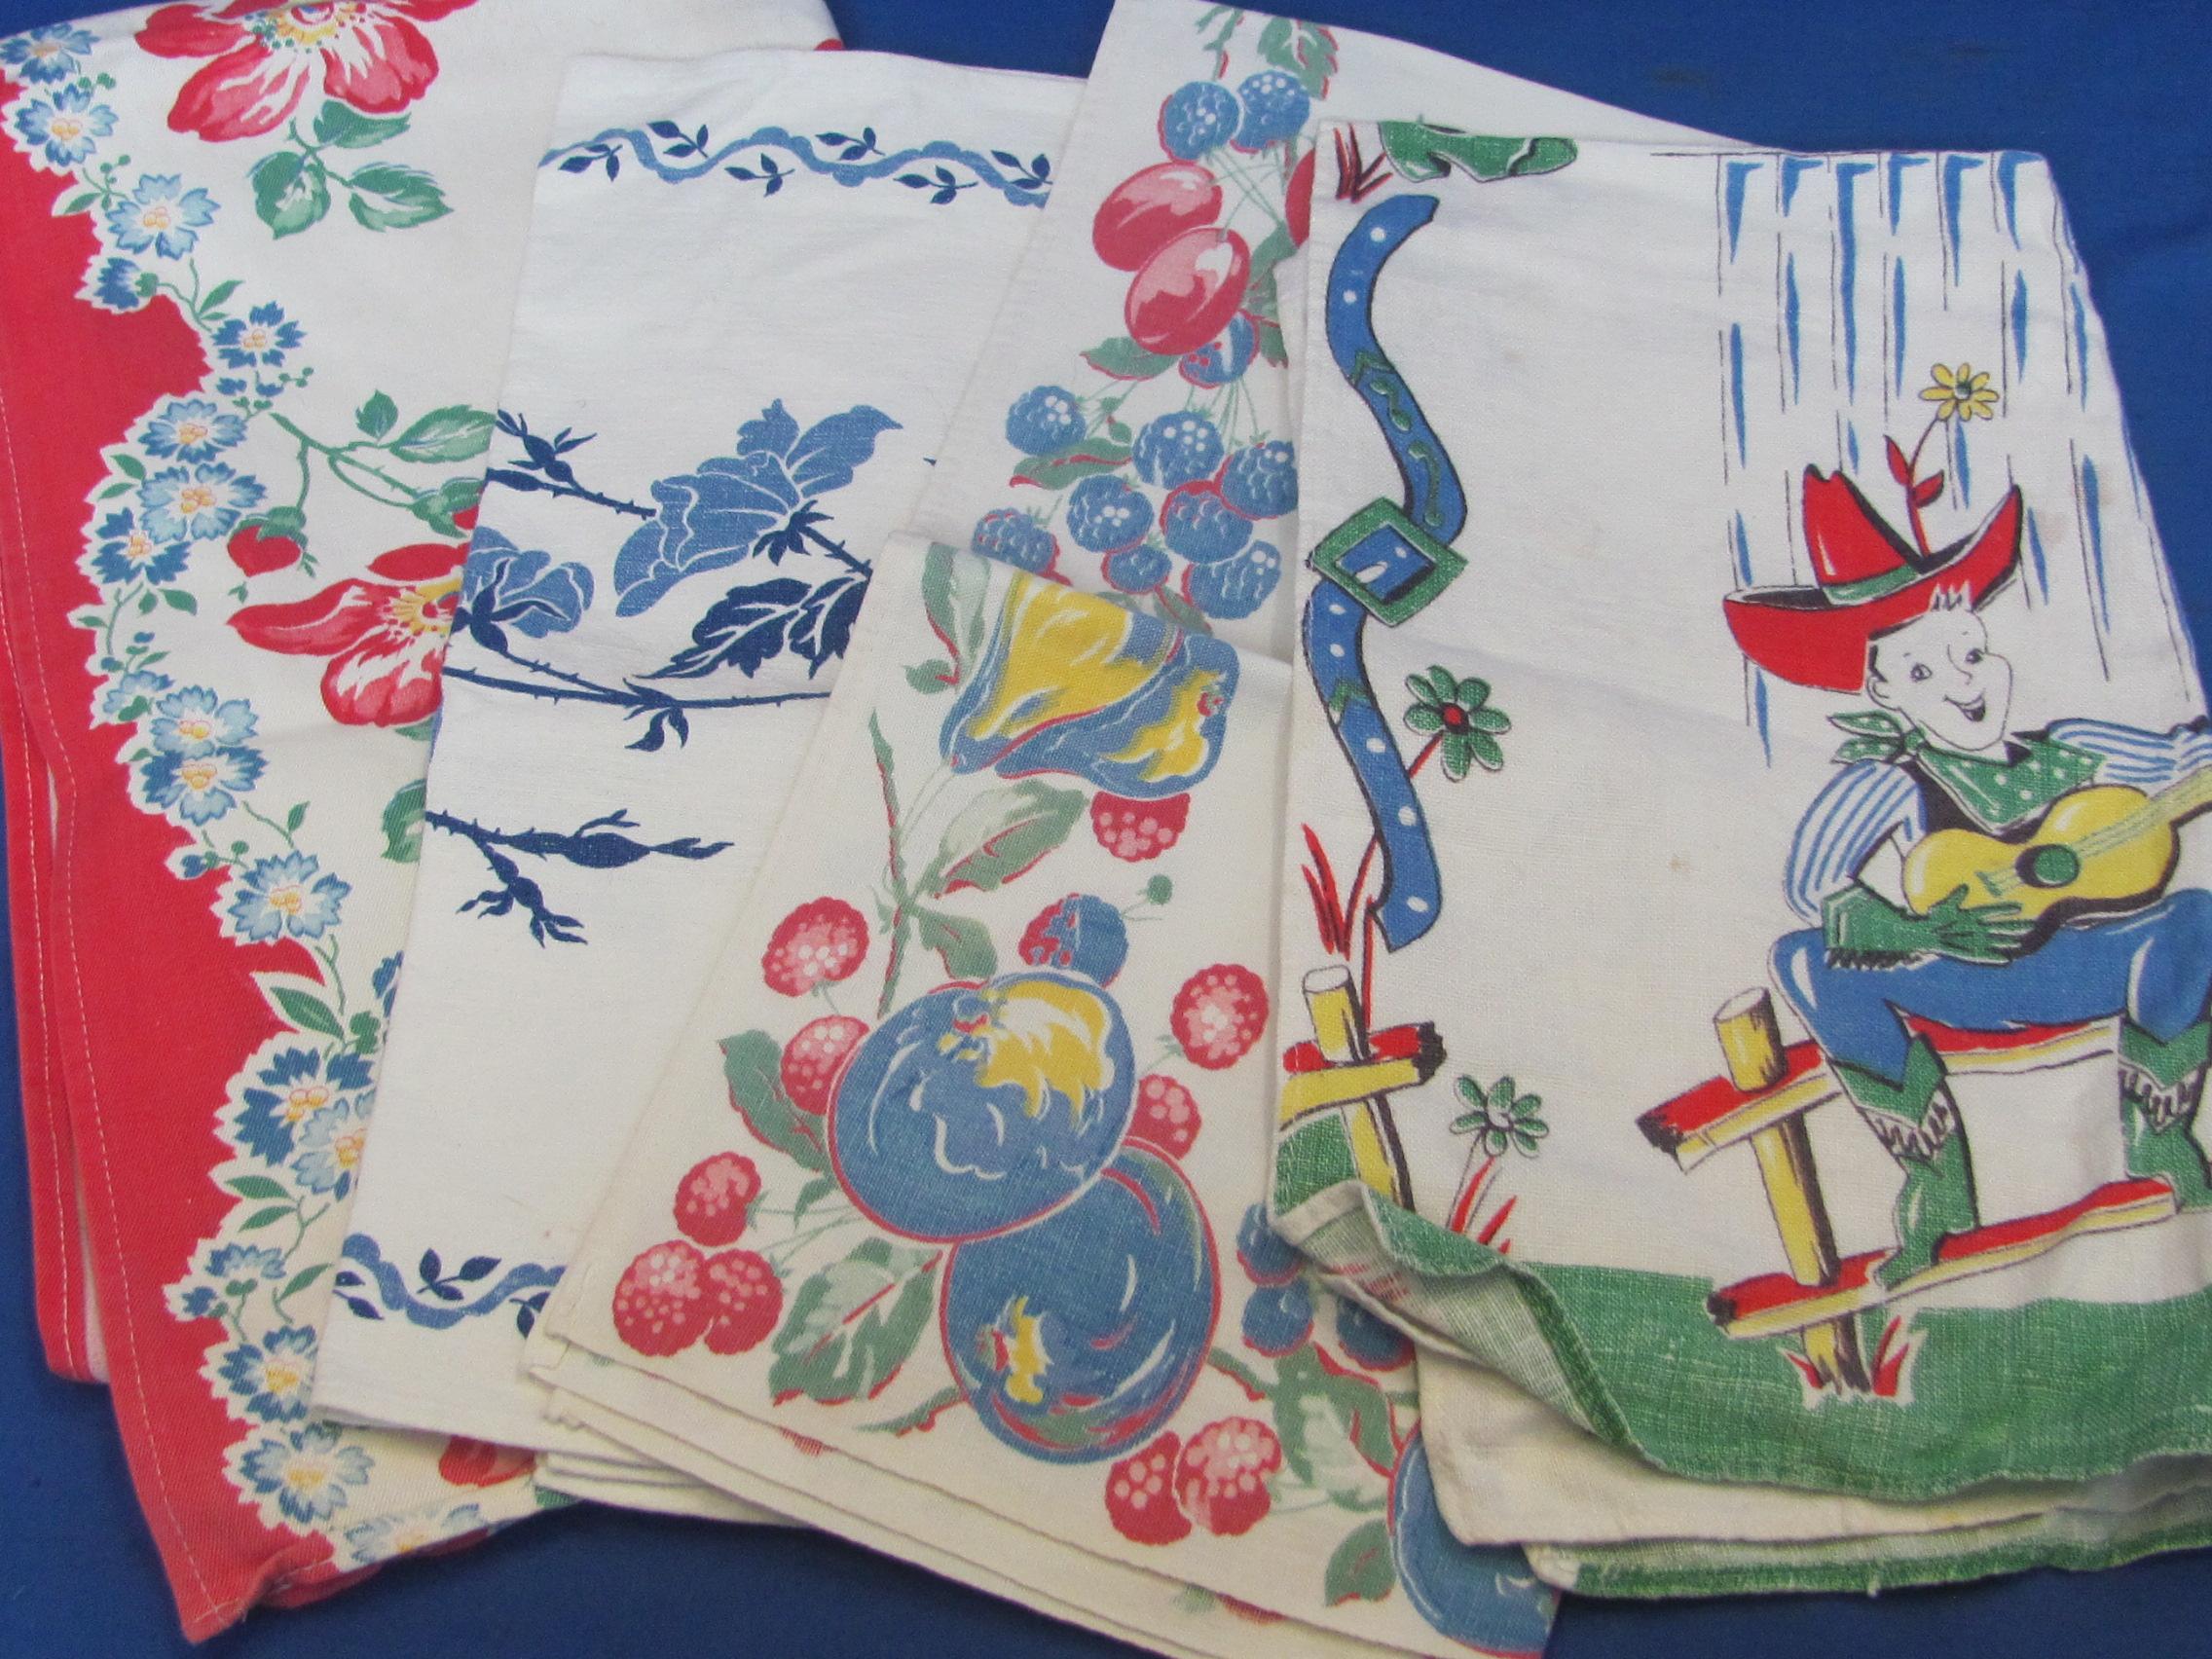 4 Vintage Kitchen Towels – 3 are Floral – 1 has a Cowboy Courting Scene (Slightly Faded)